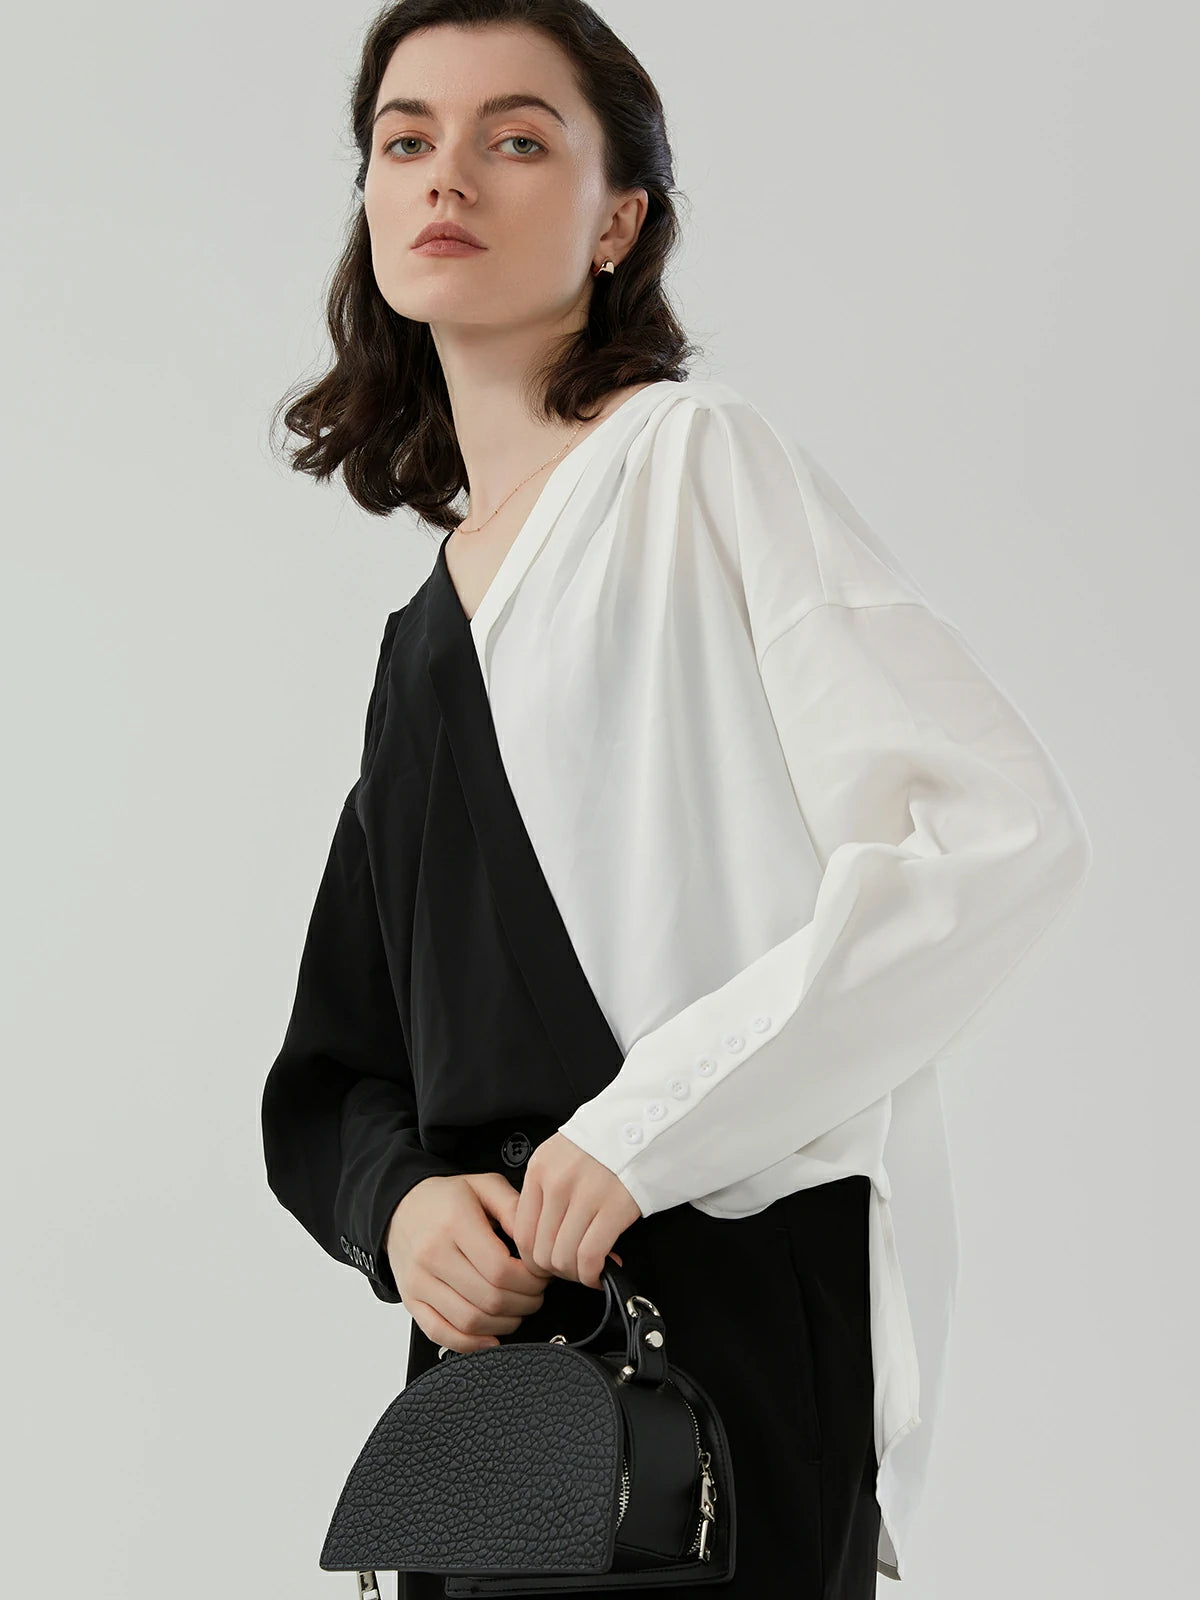 Unique Modern Appeal of Black and White Color-Block Chiffon Blouse